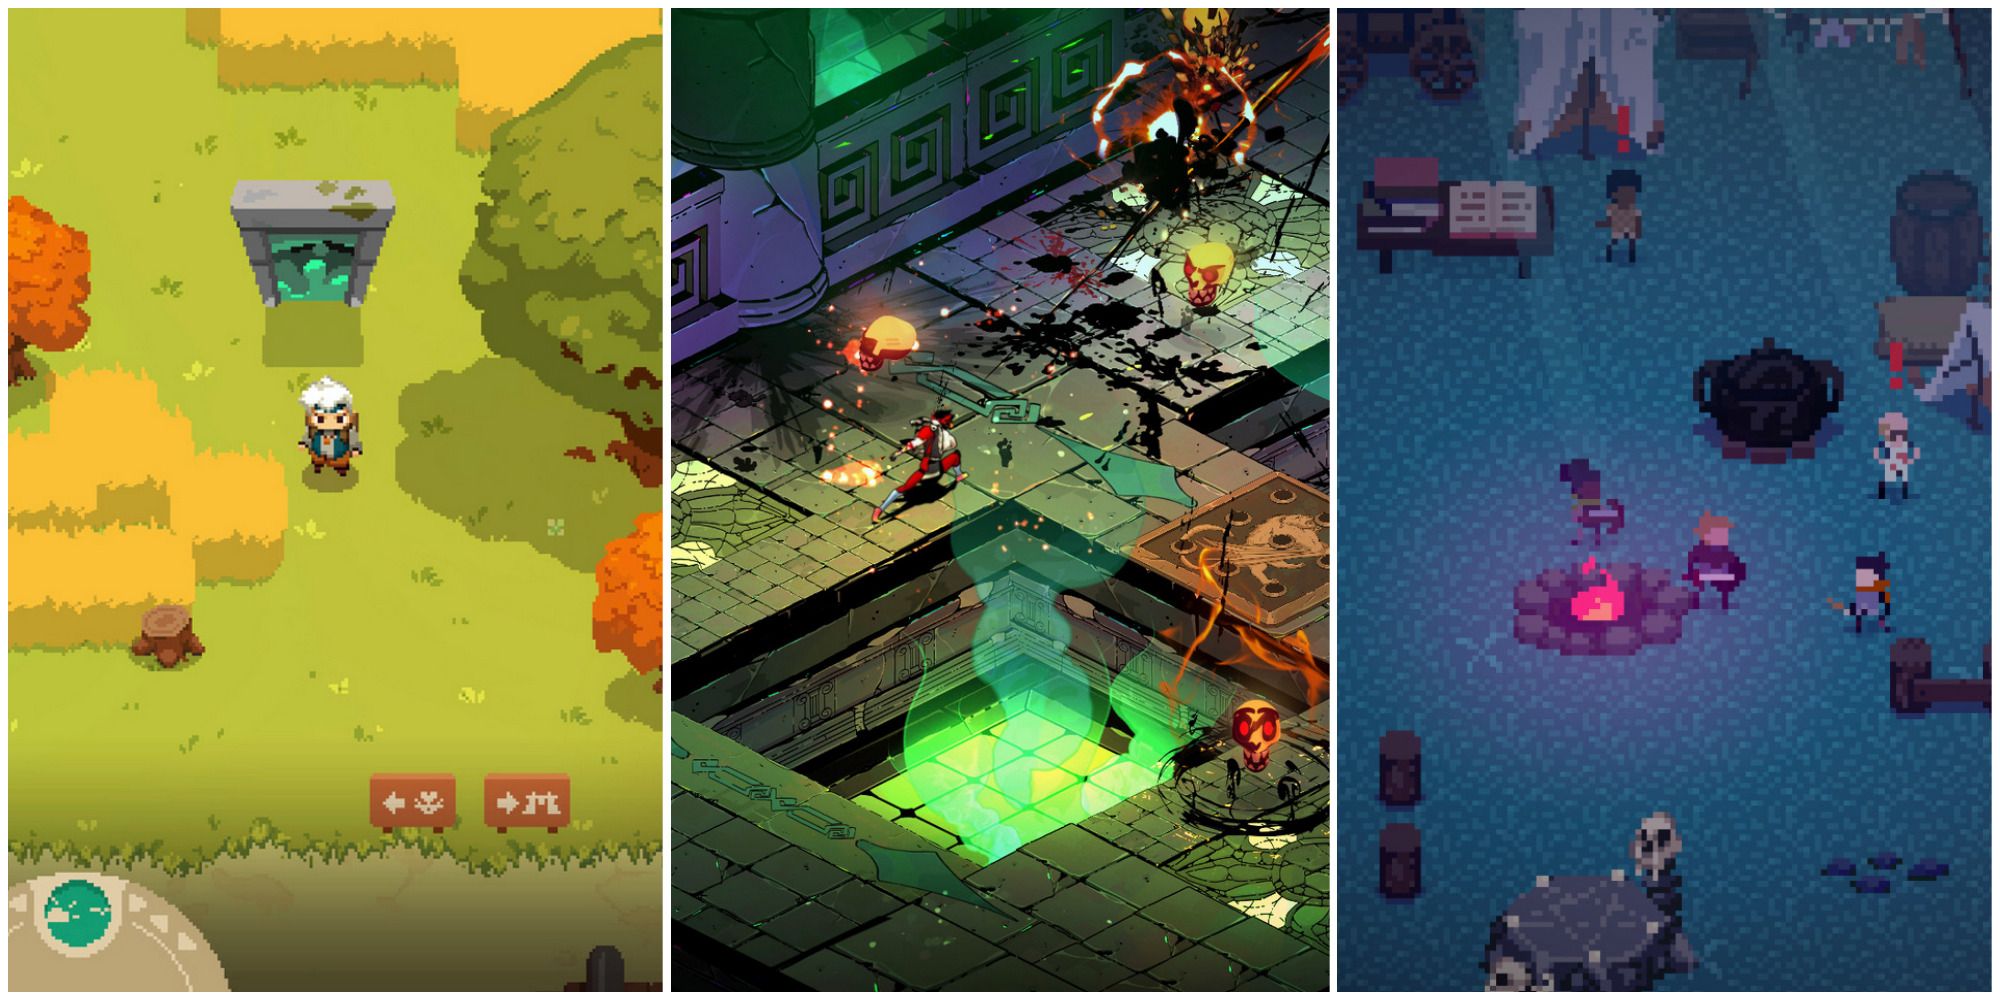 moonlighter character in field, hades zagreus in battle, mana spark hero at campsite featured